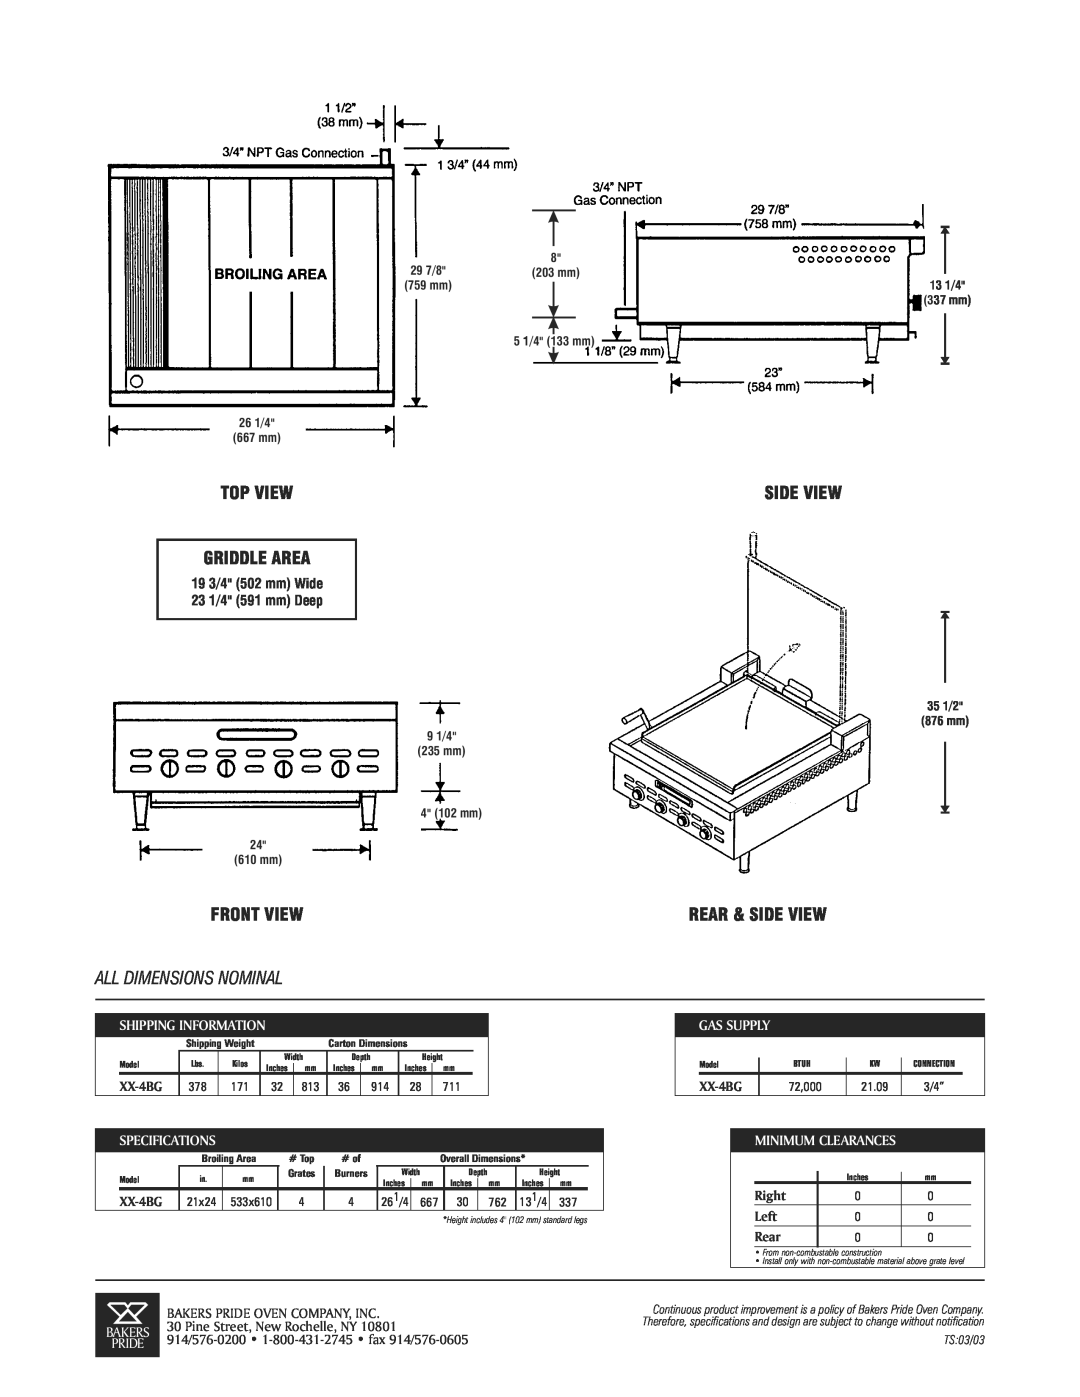 Bakers Pride Oven XX-4BG All Dimensions Nominal, 19 3/4 502 mm Wide 23 1/4 591 mm Deep, Gas Supply, Minimum Clearances 